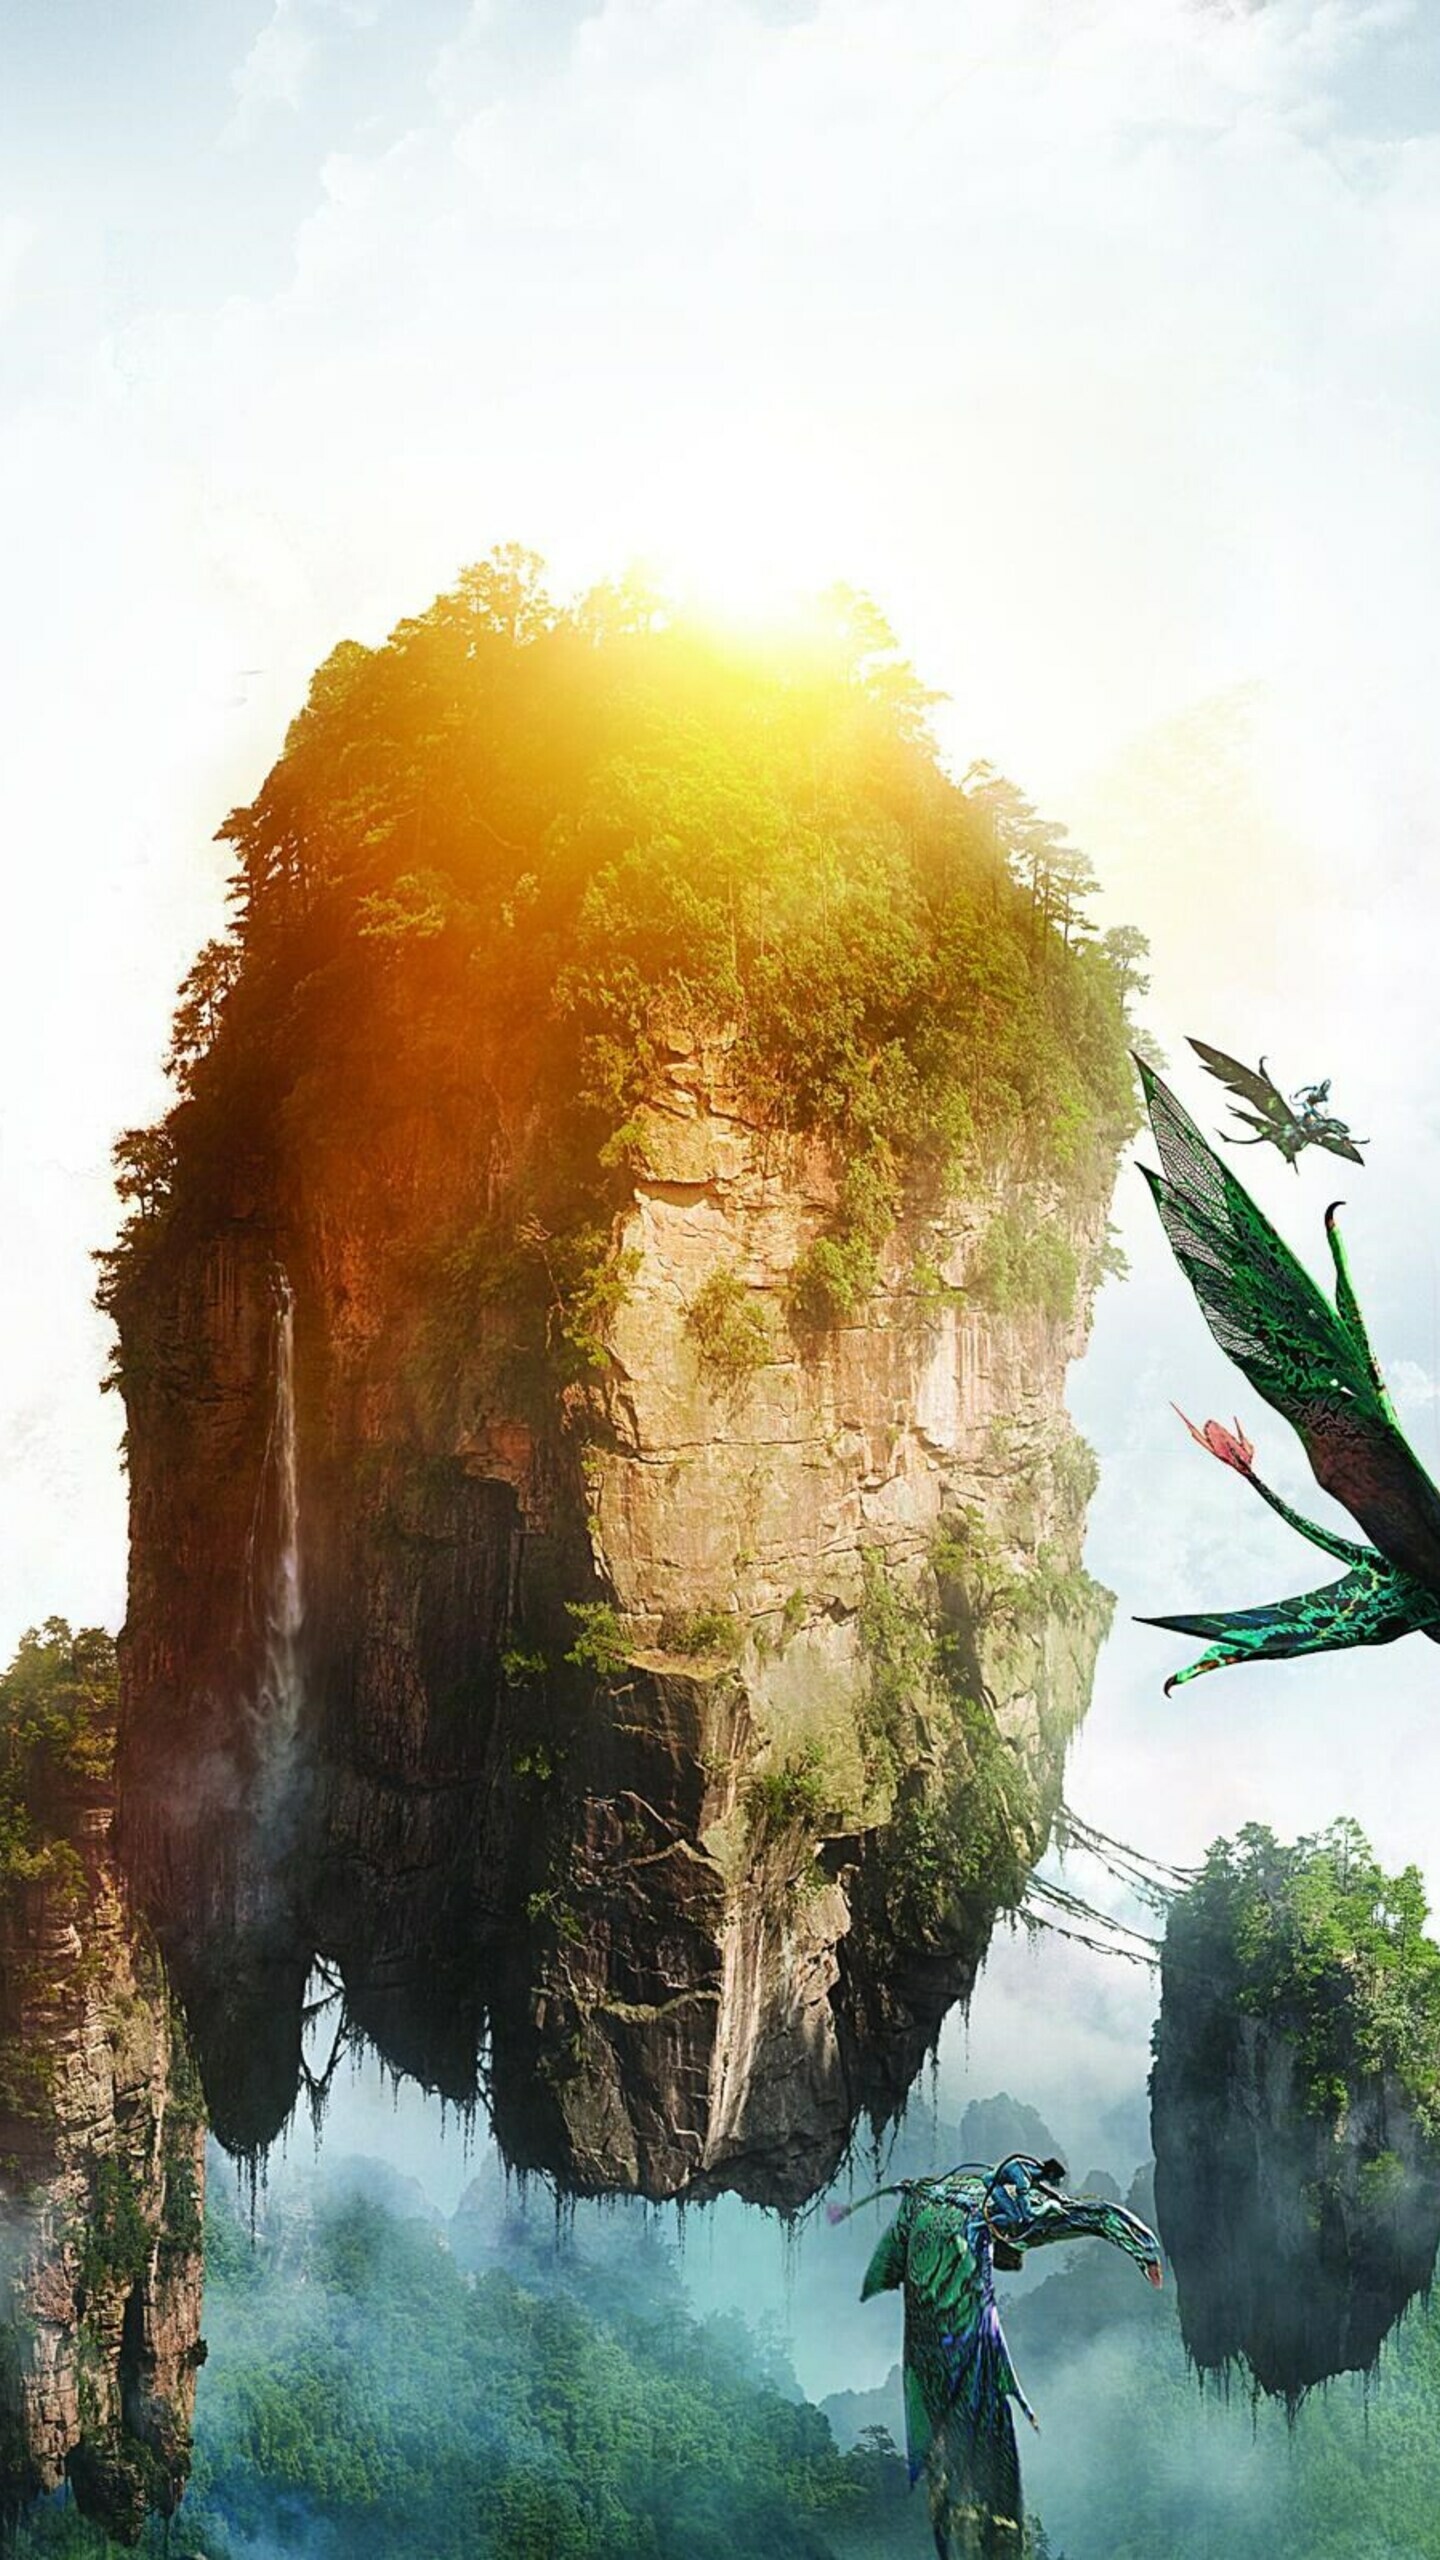 Avatar: Pandora's floating "Hallelujah Mountains" were inspired in part by the Chinese Huangshan mountains. 1440x2560 HD Wallpaper.